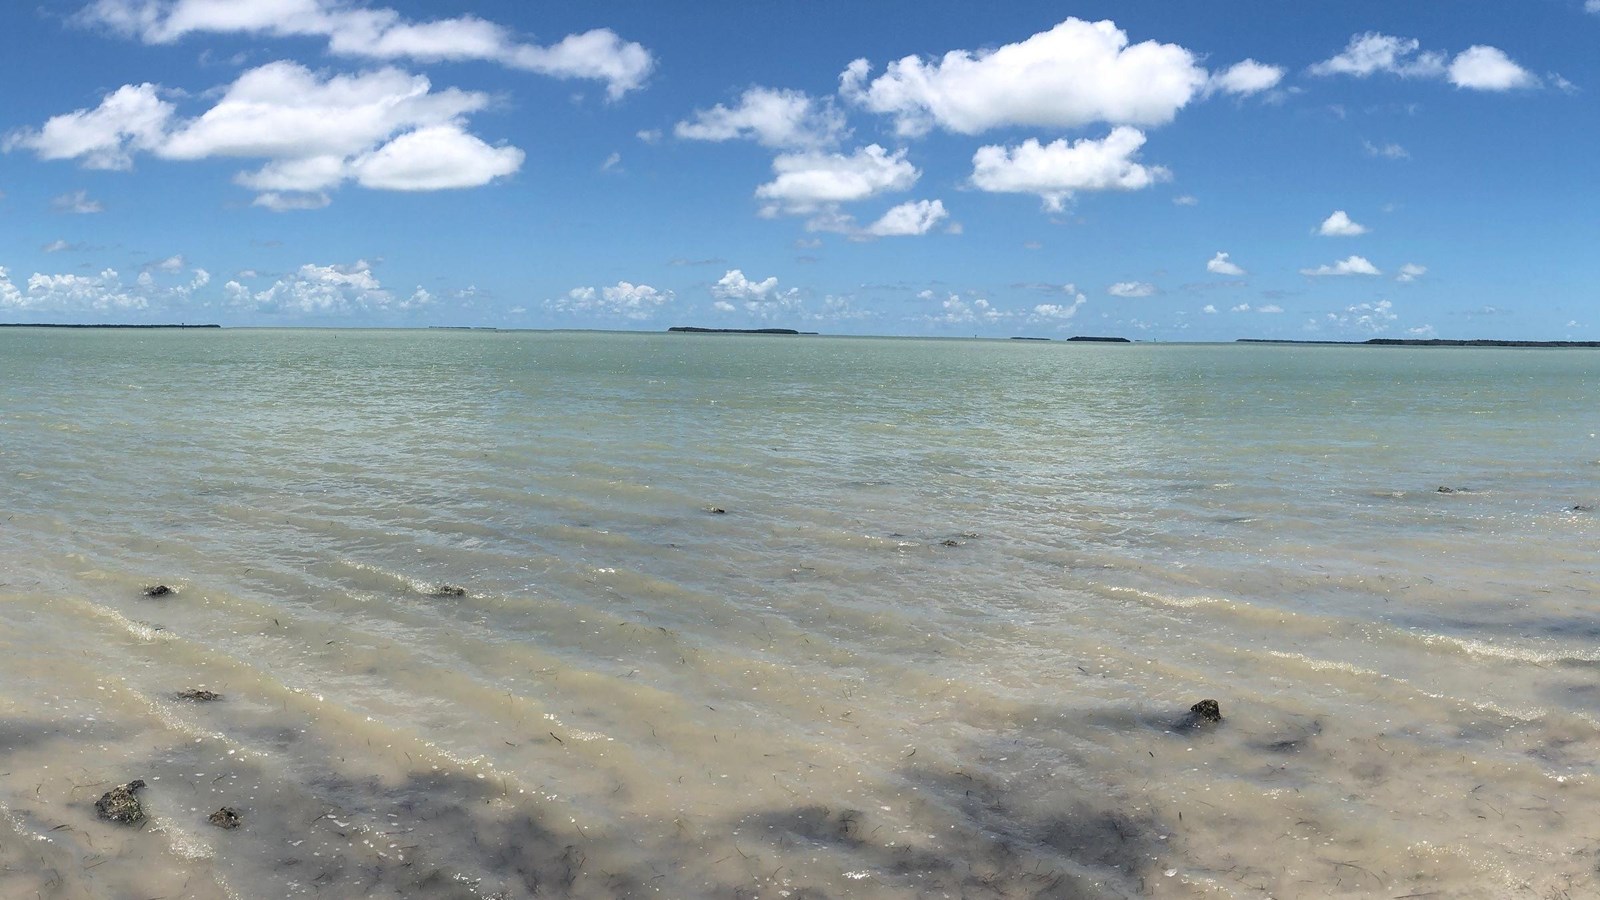 Water color of Florida Bay moves from brown oo green against a bright blue sky with white clouds